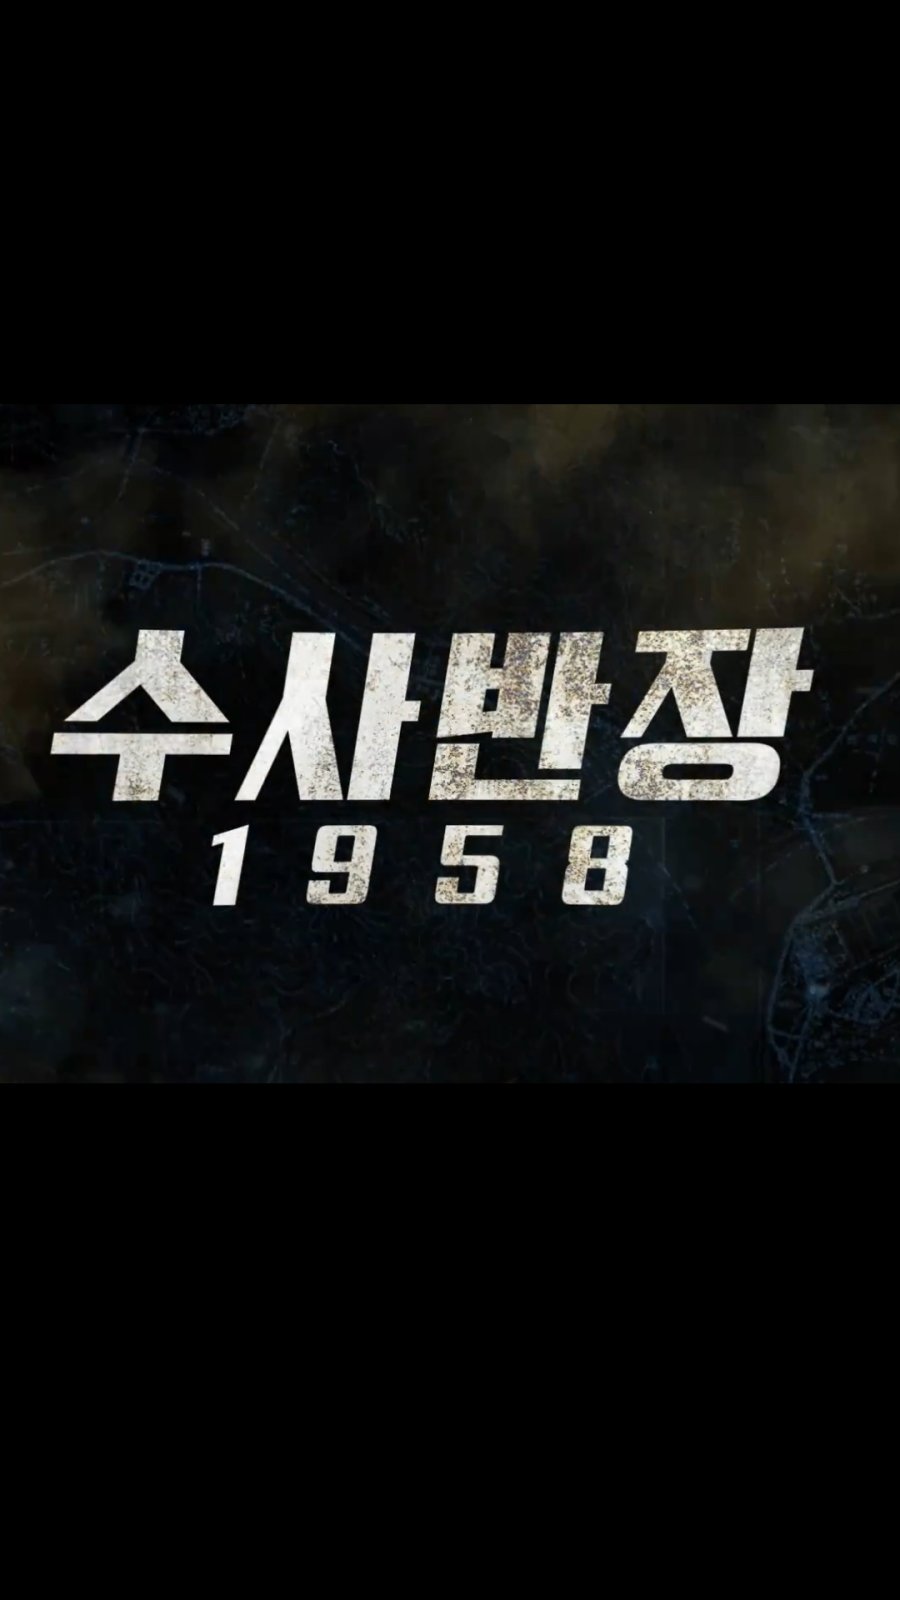 Chief Detective 1958 Capitulo 9